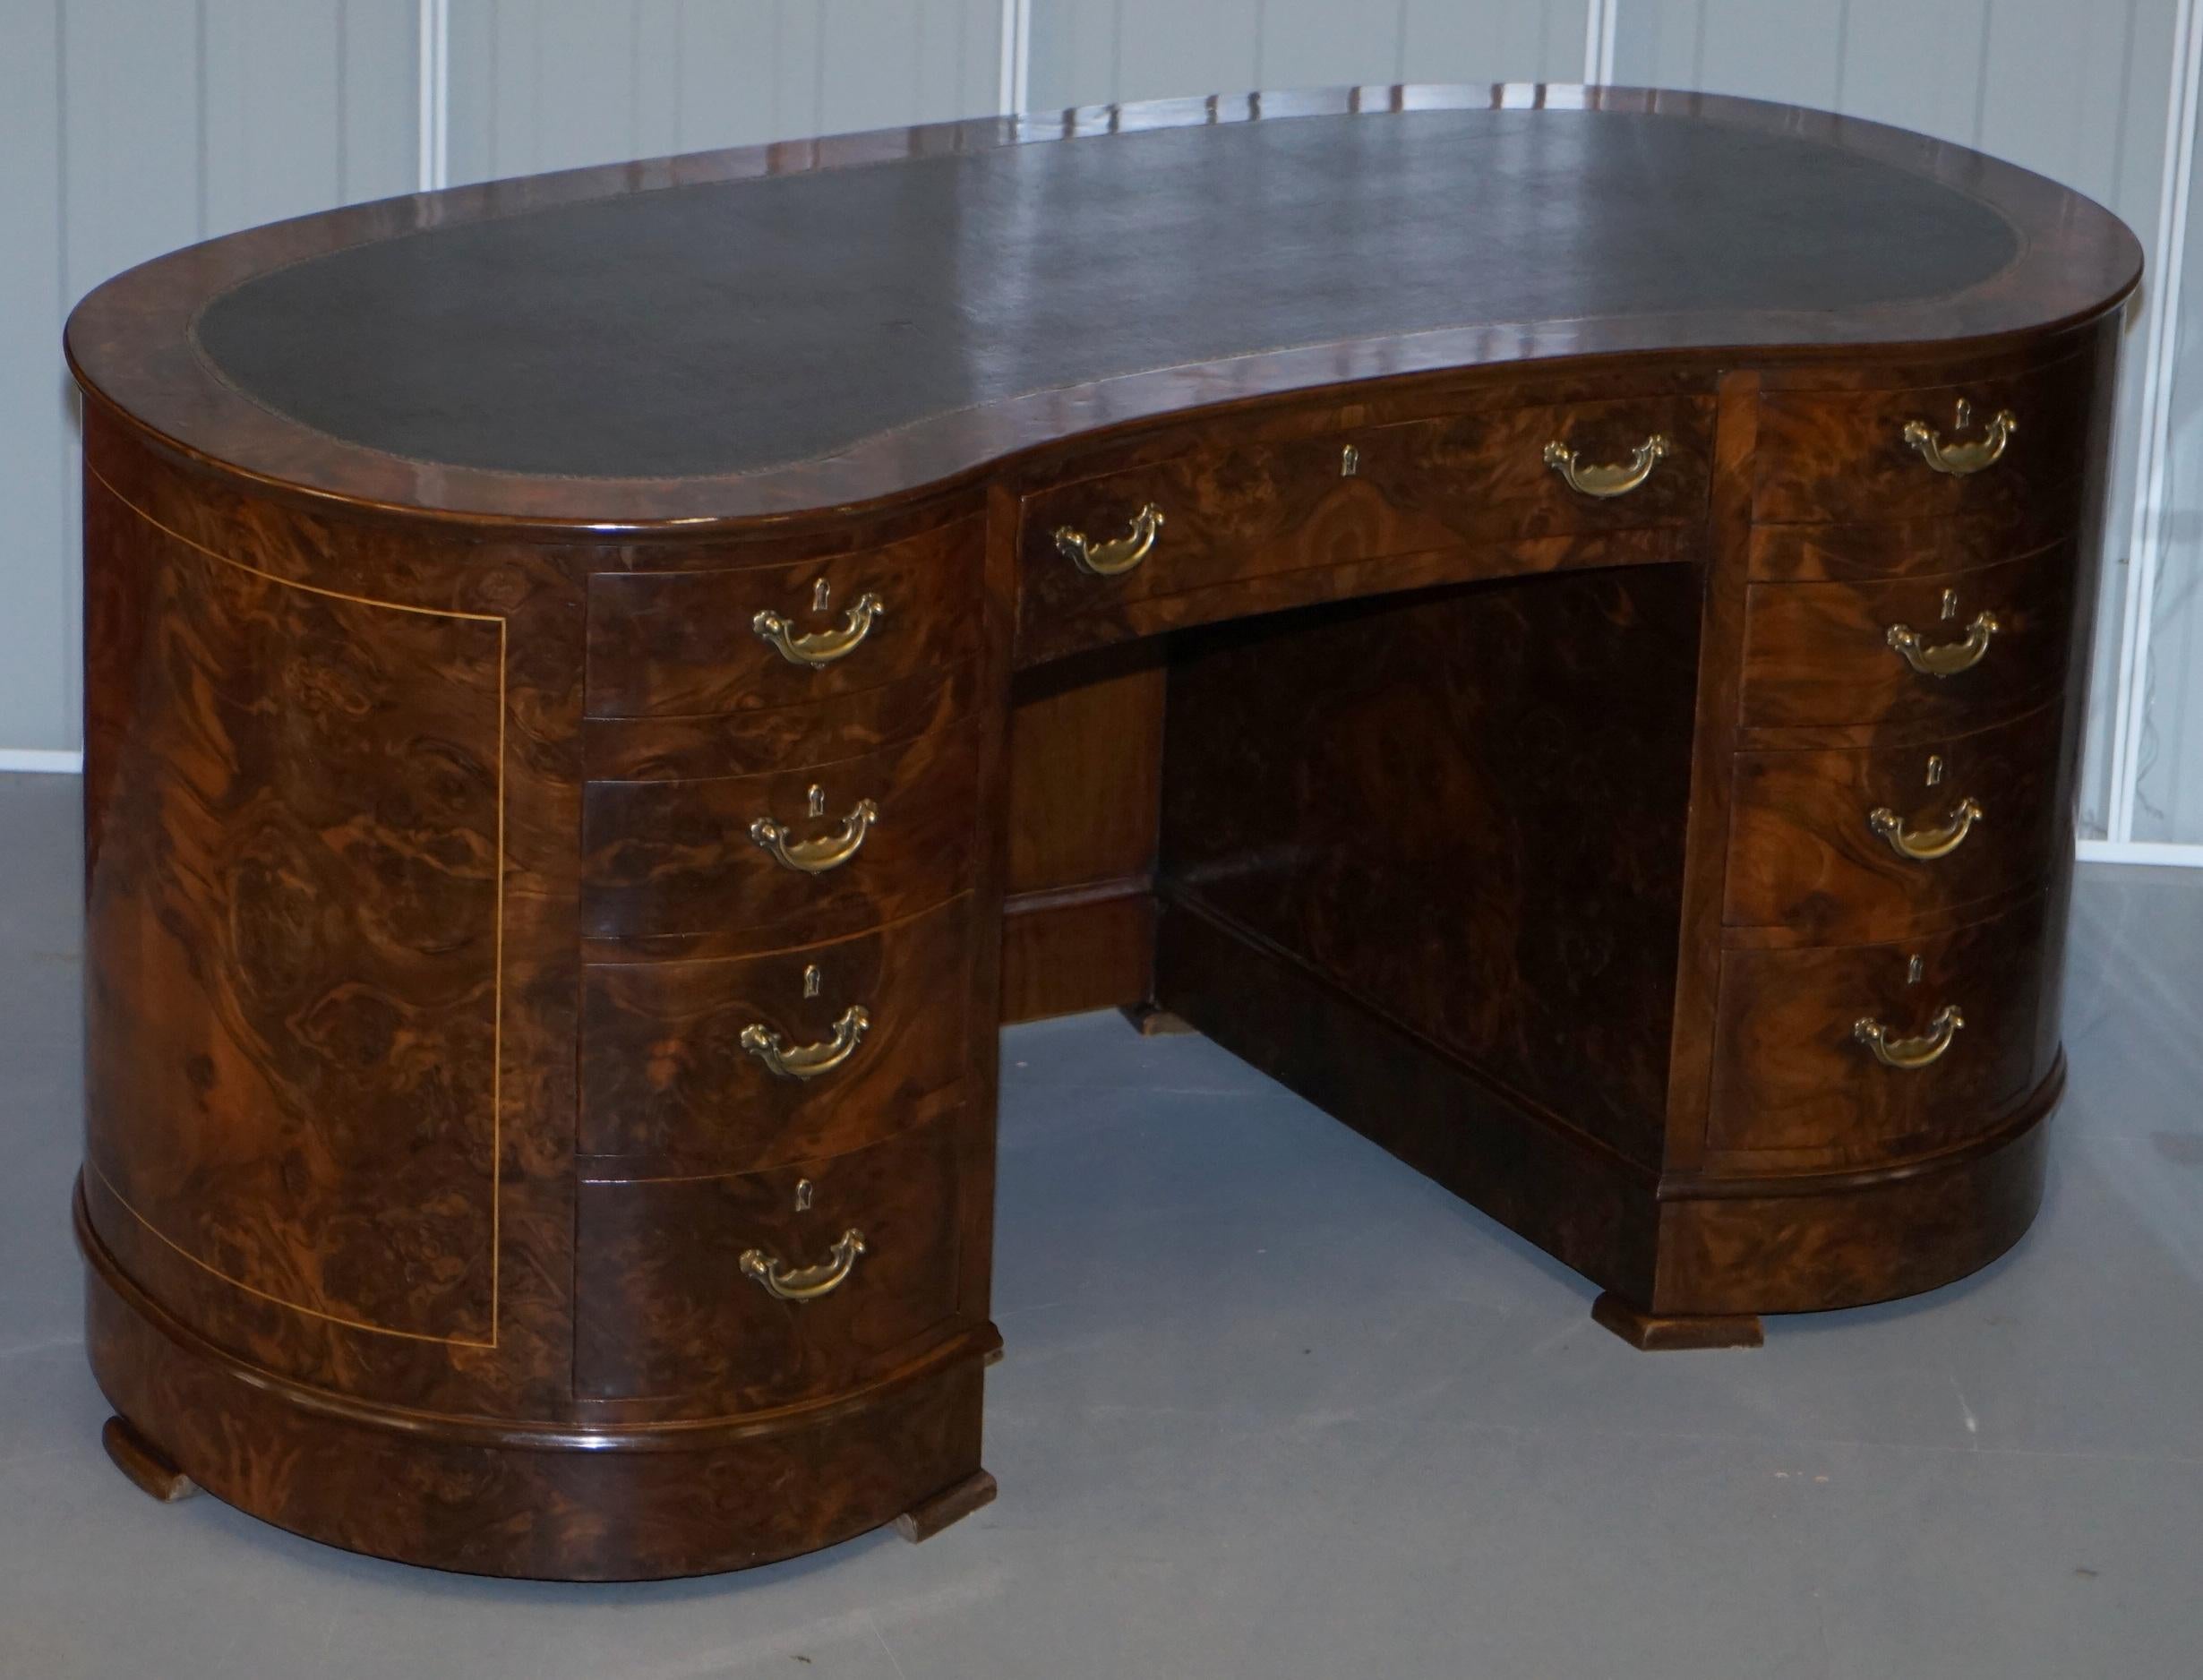 We are delighted to offer for sale this absolutely stunning burr and burl walnut twin pedestal kidney desk with twin cupboard bookcases to the rear

A very good looking well made and decorative twin pedestal desk, rare to find in the kidney form.